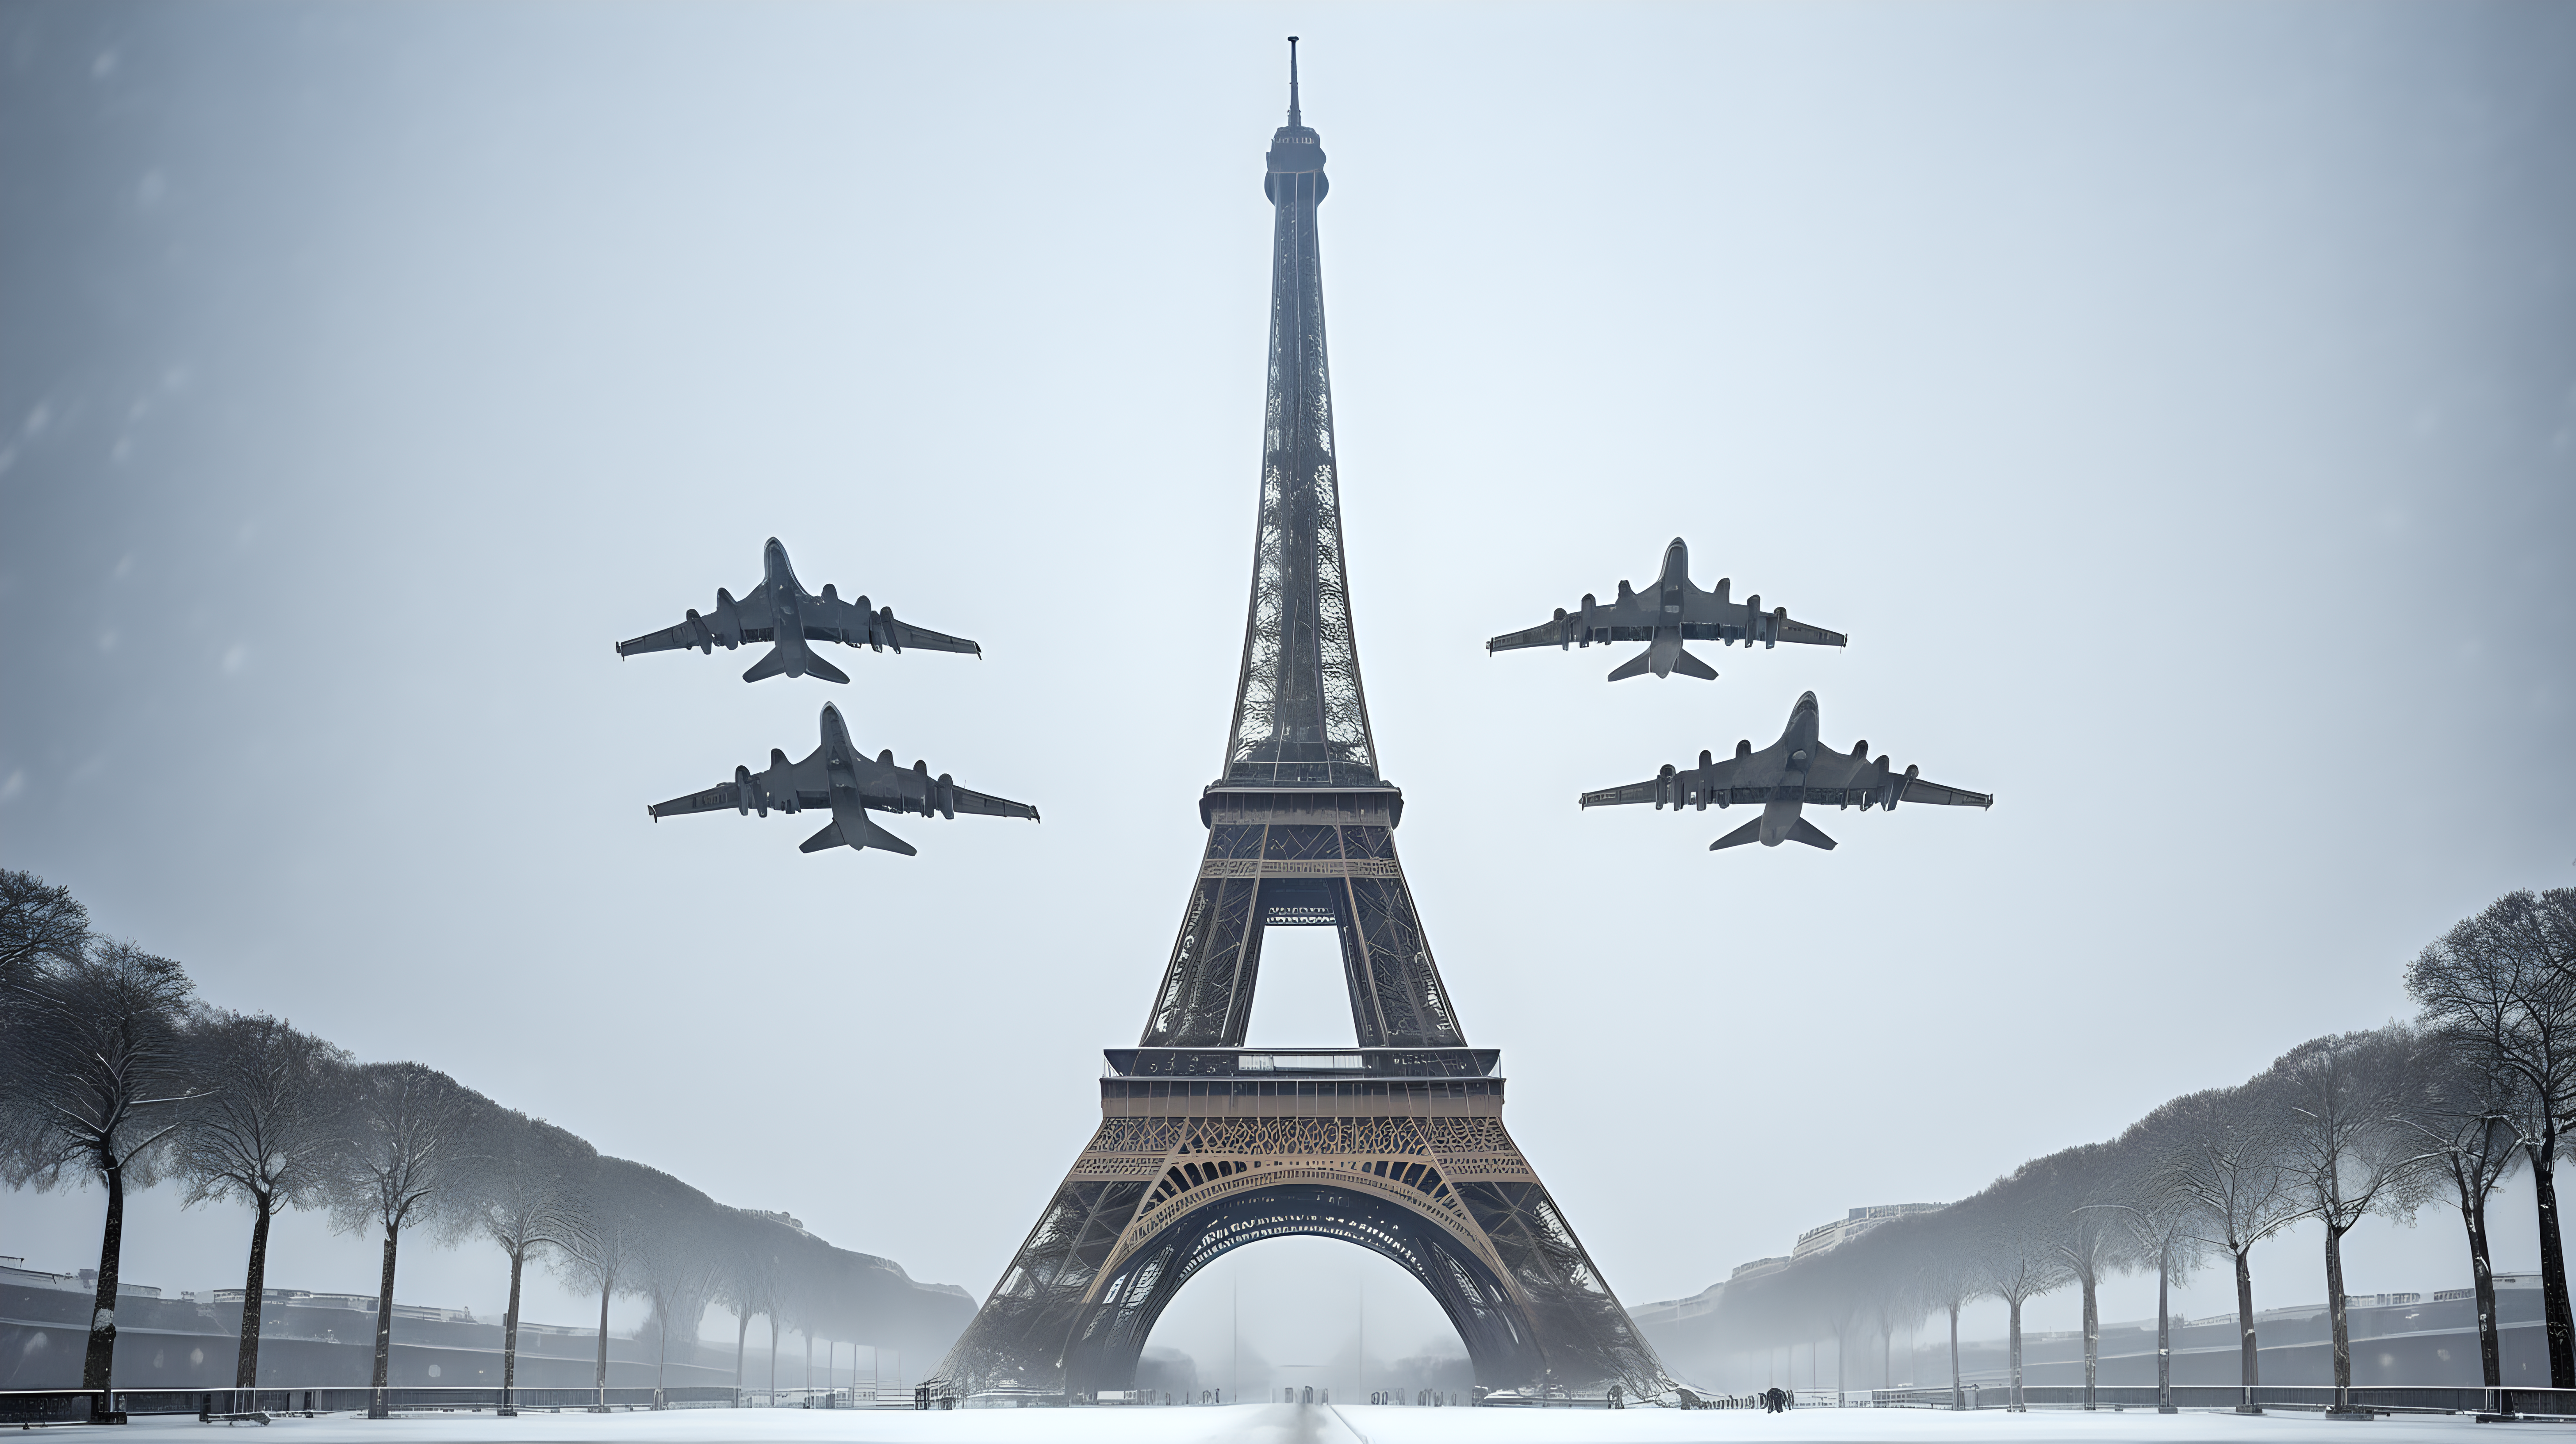 Eiffel tower in winter snow storm with 3 stealth bombers flying overhead